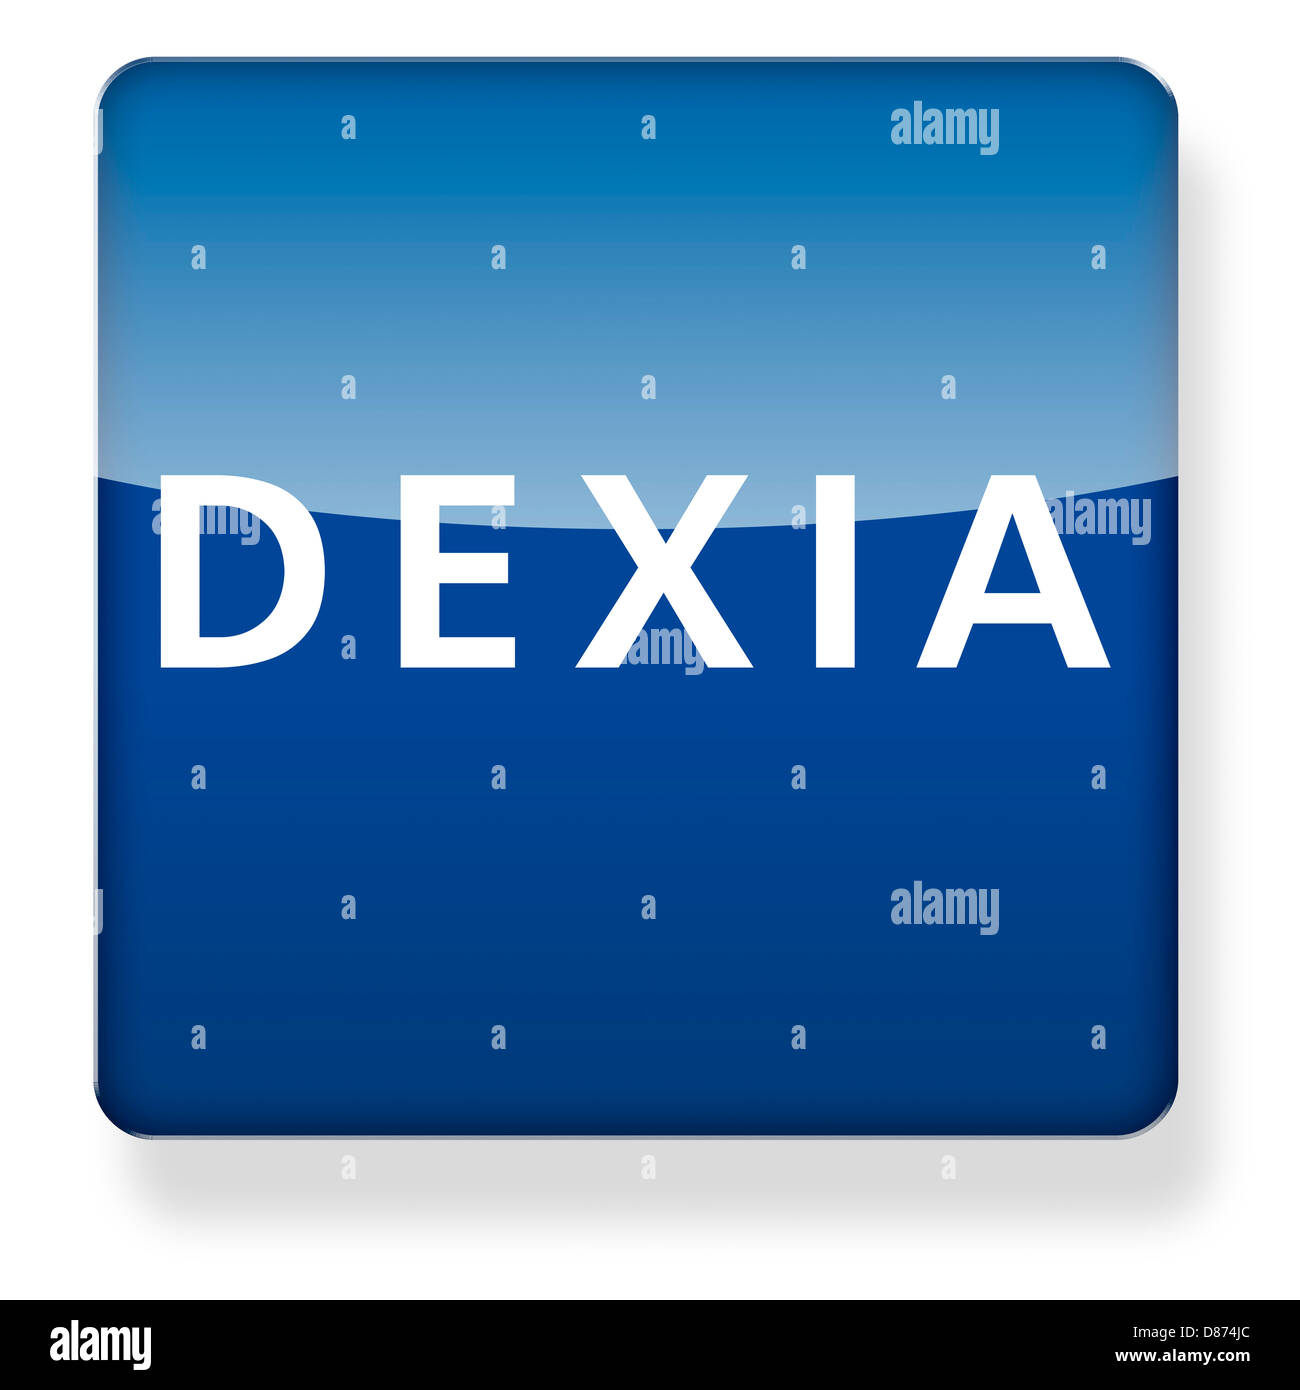 Dexia logo as an app icon. Clipping path included. Stock Photo